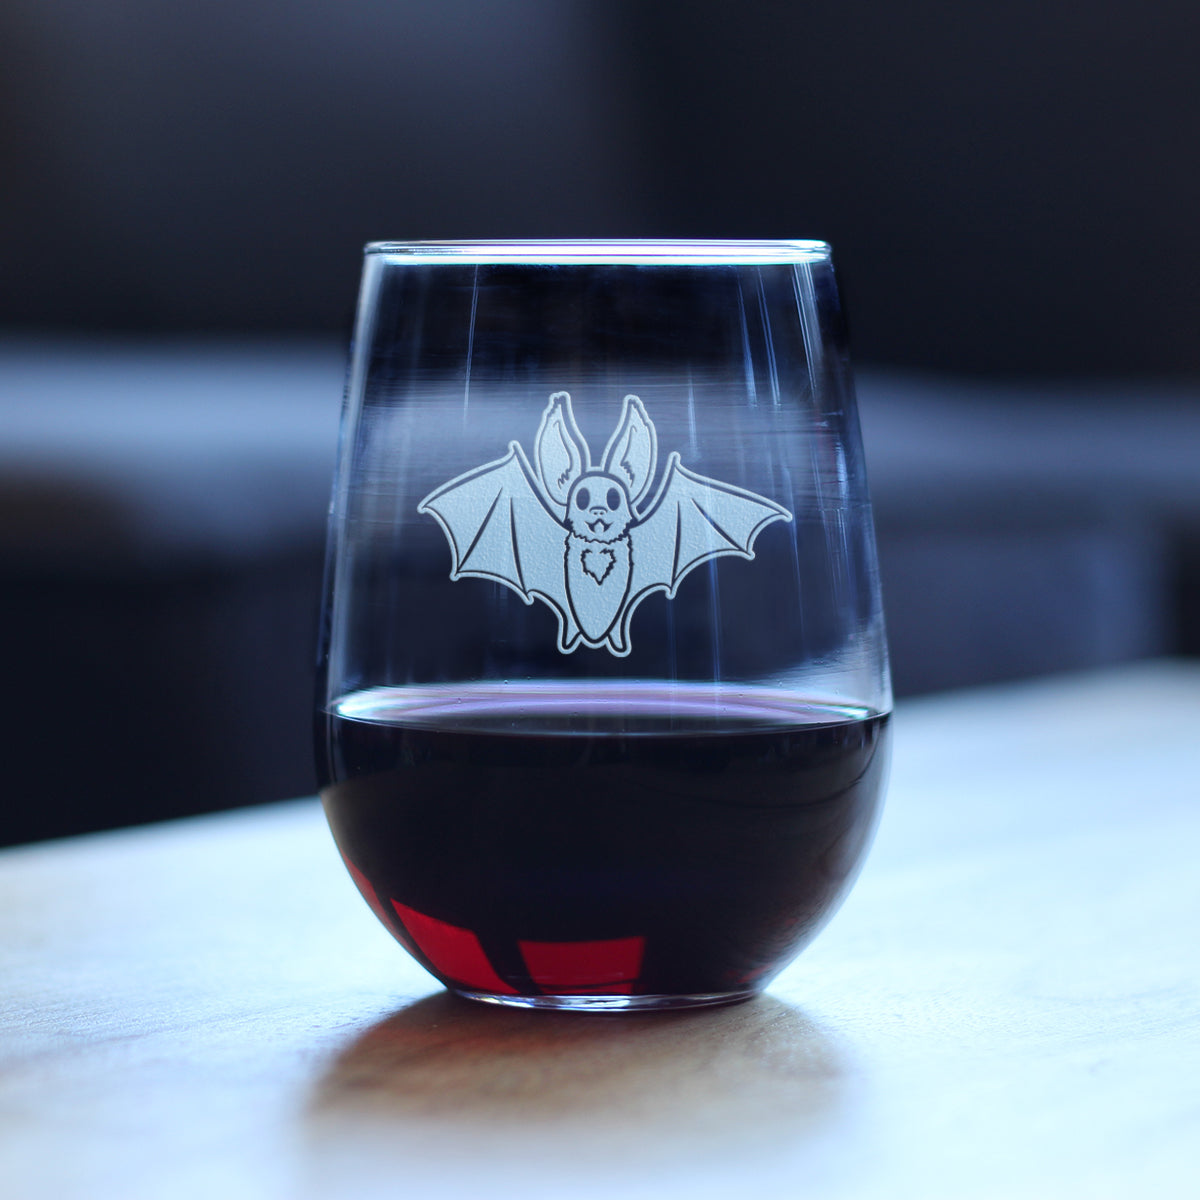 Bat Stemless Wine Glass - Funny Cute Bat Gifts - Spooky Fun Halloween Decor with Bats - Large 17 Oz Glasses